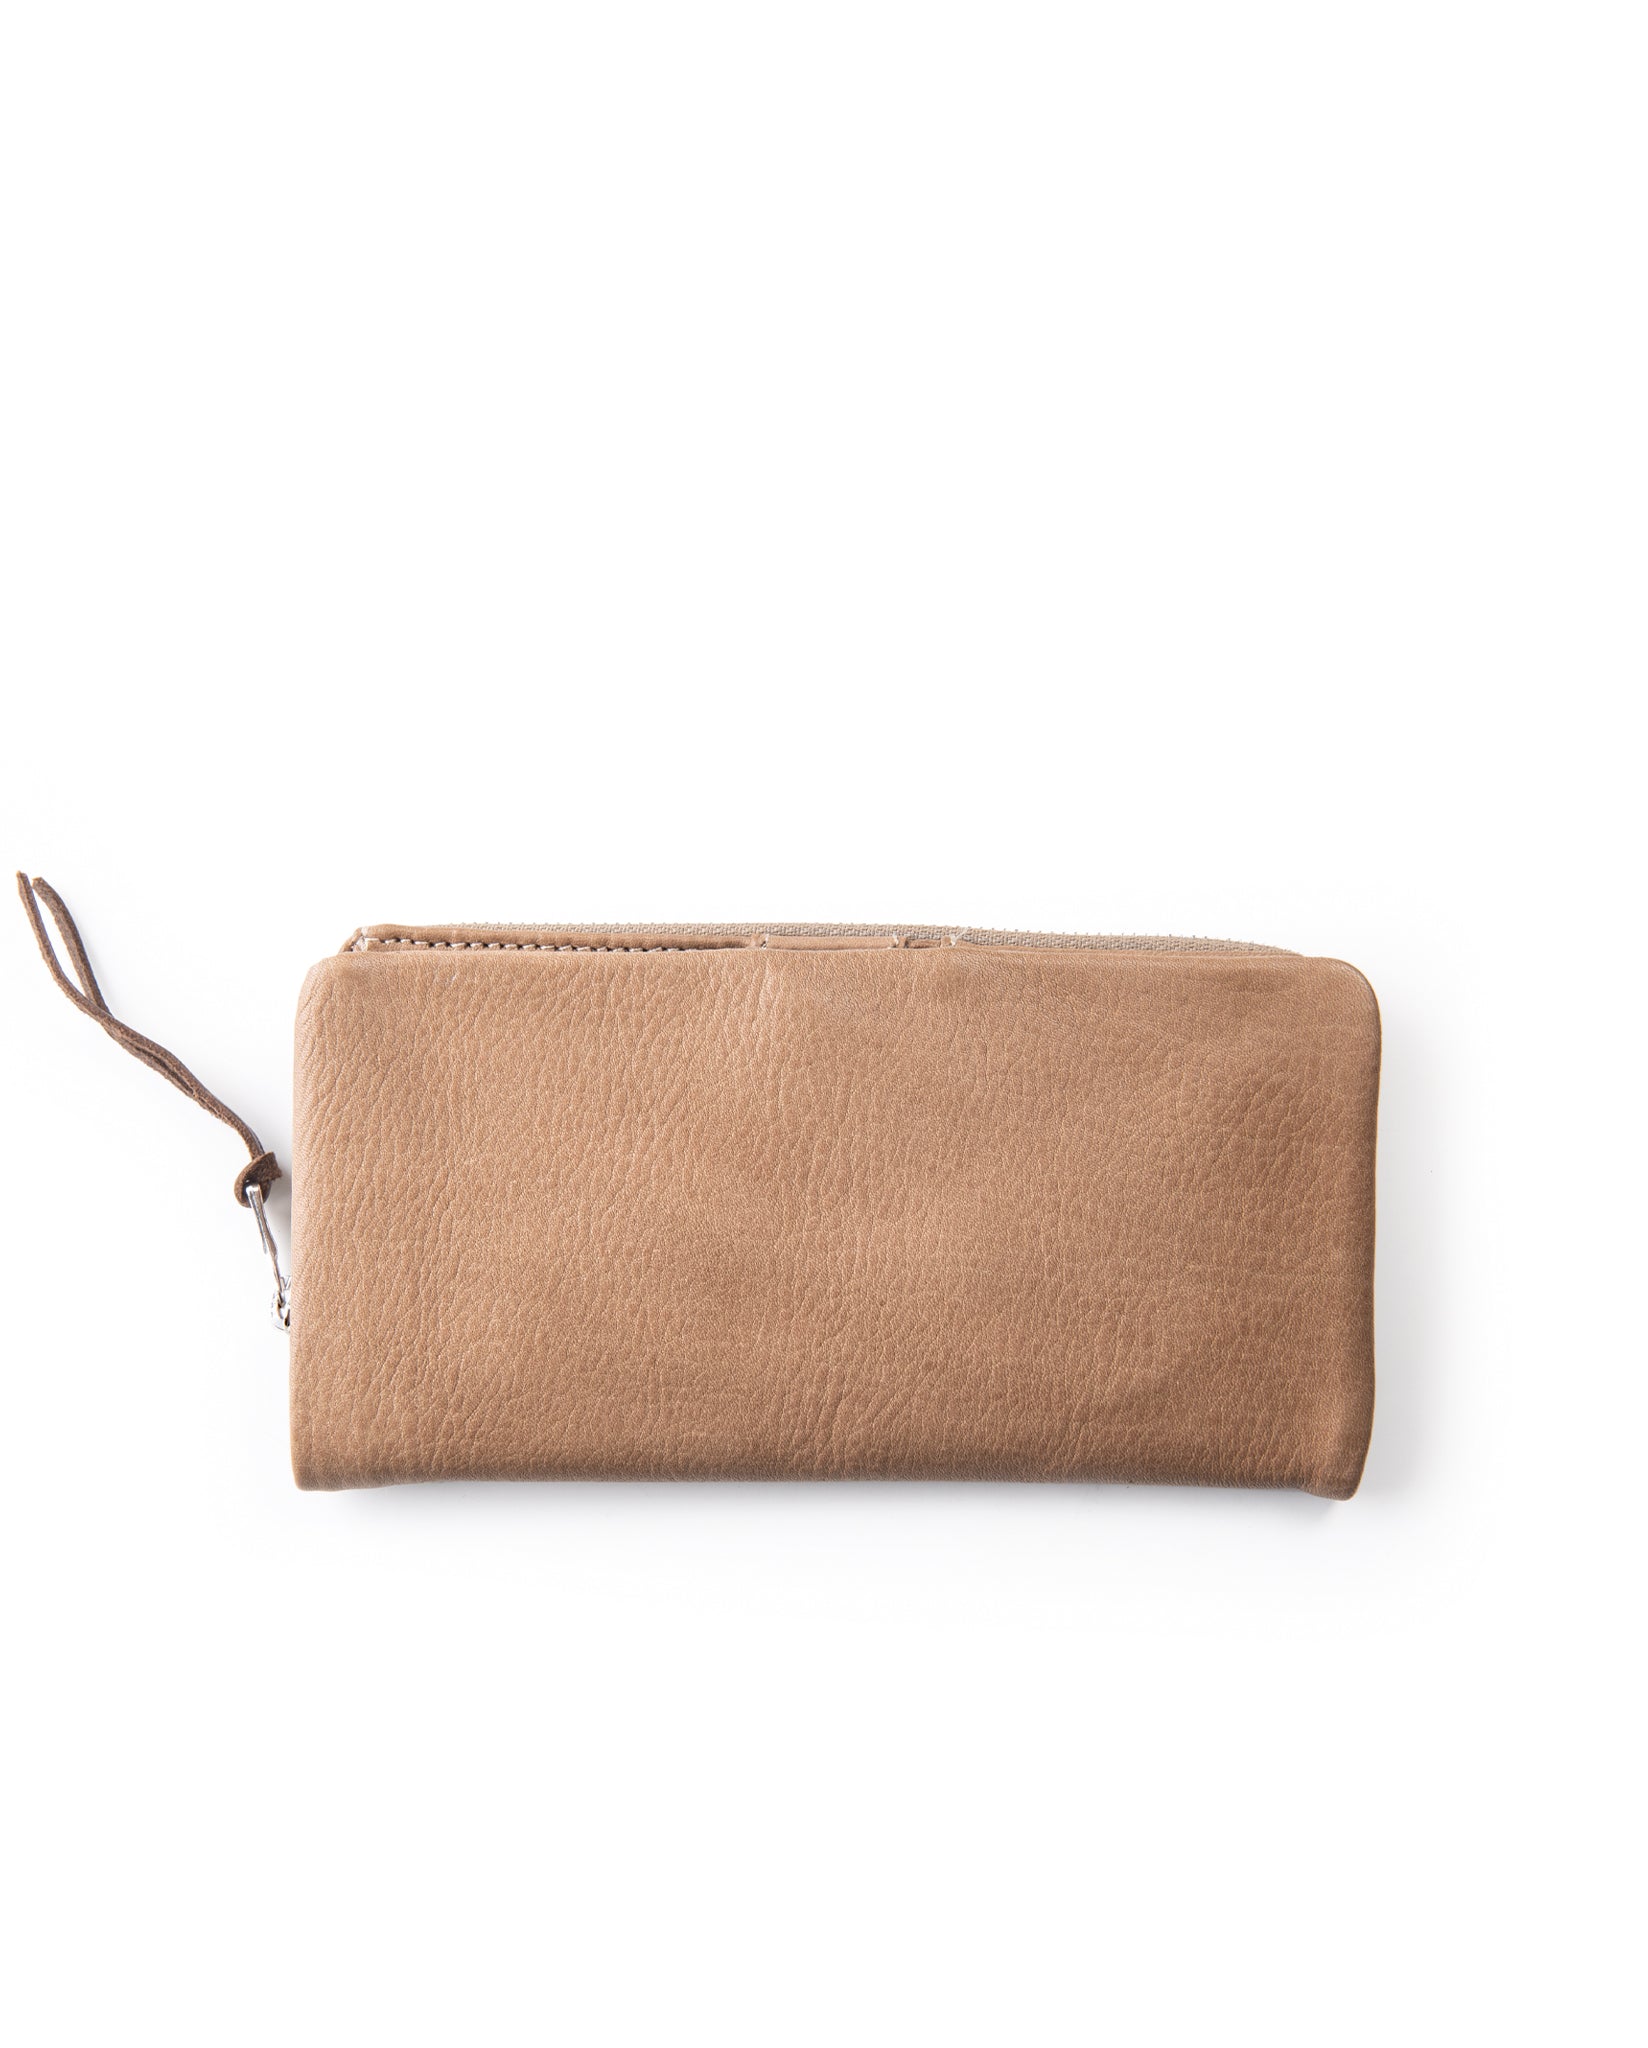 Chacoral Soft wallet large